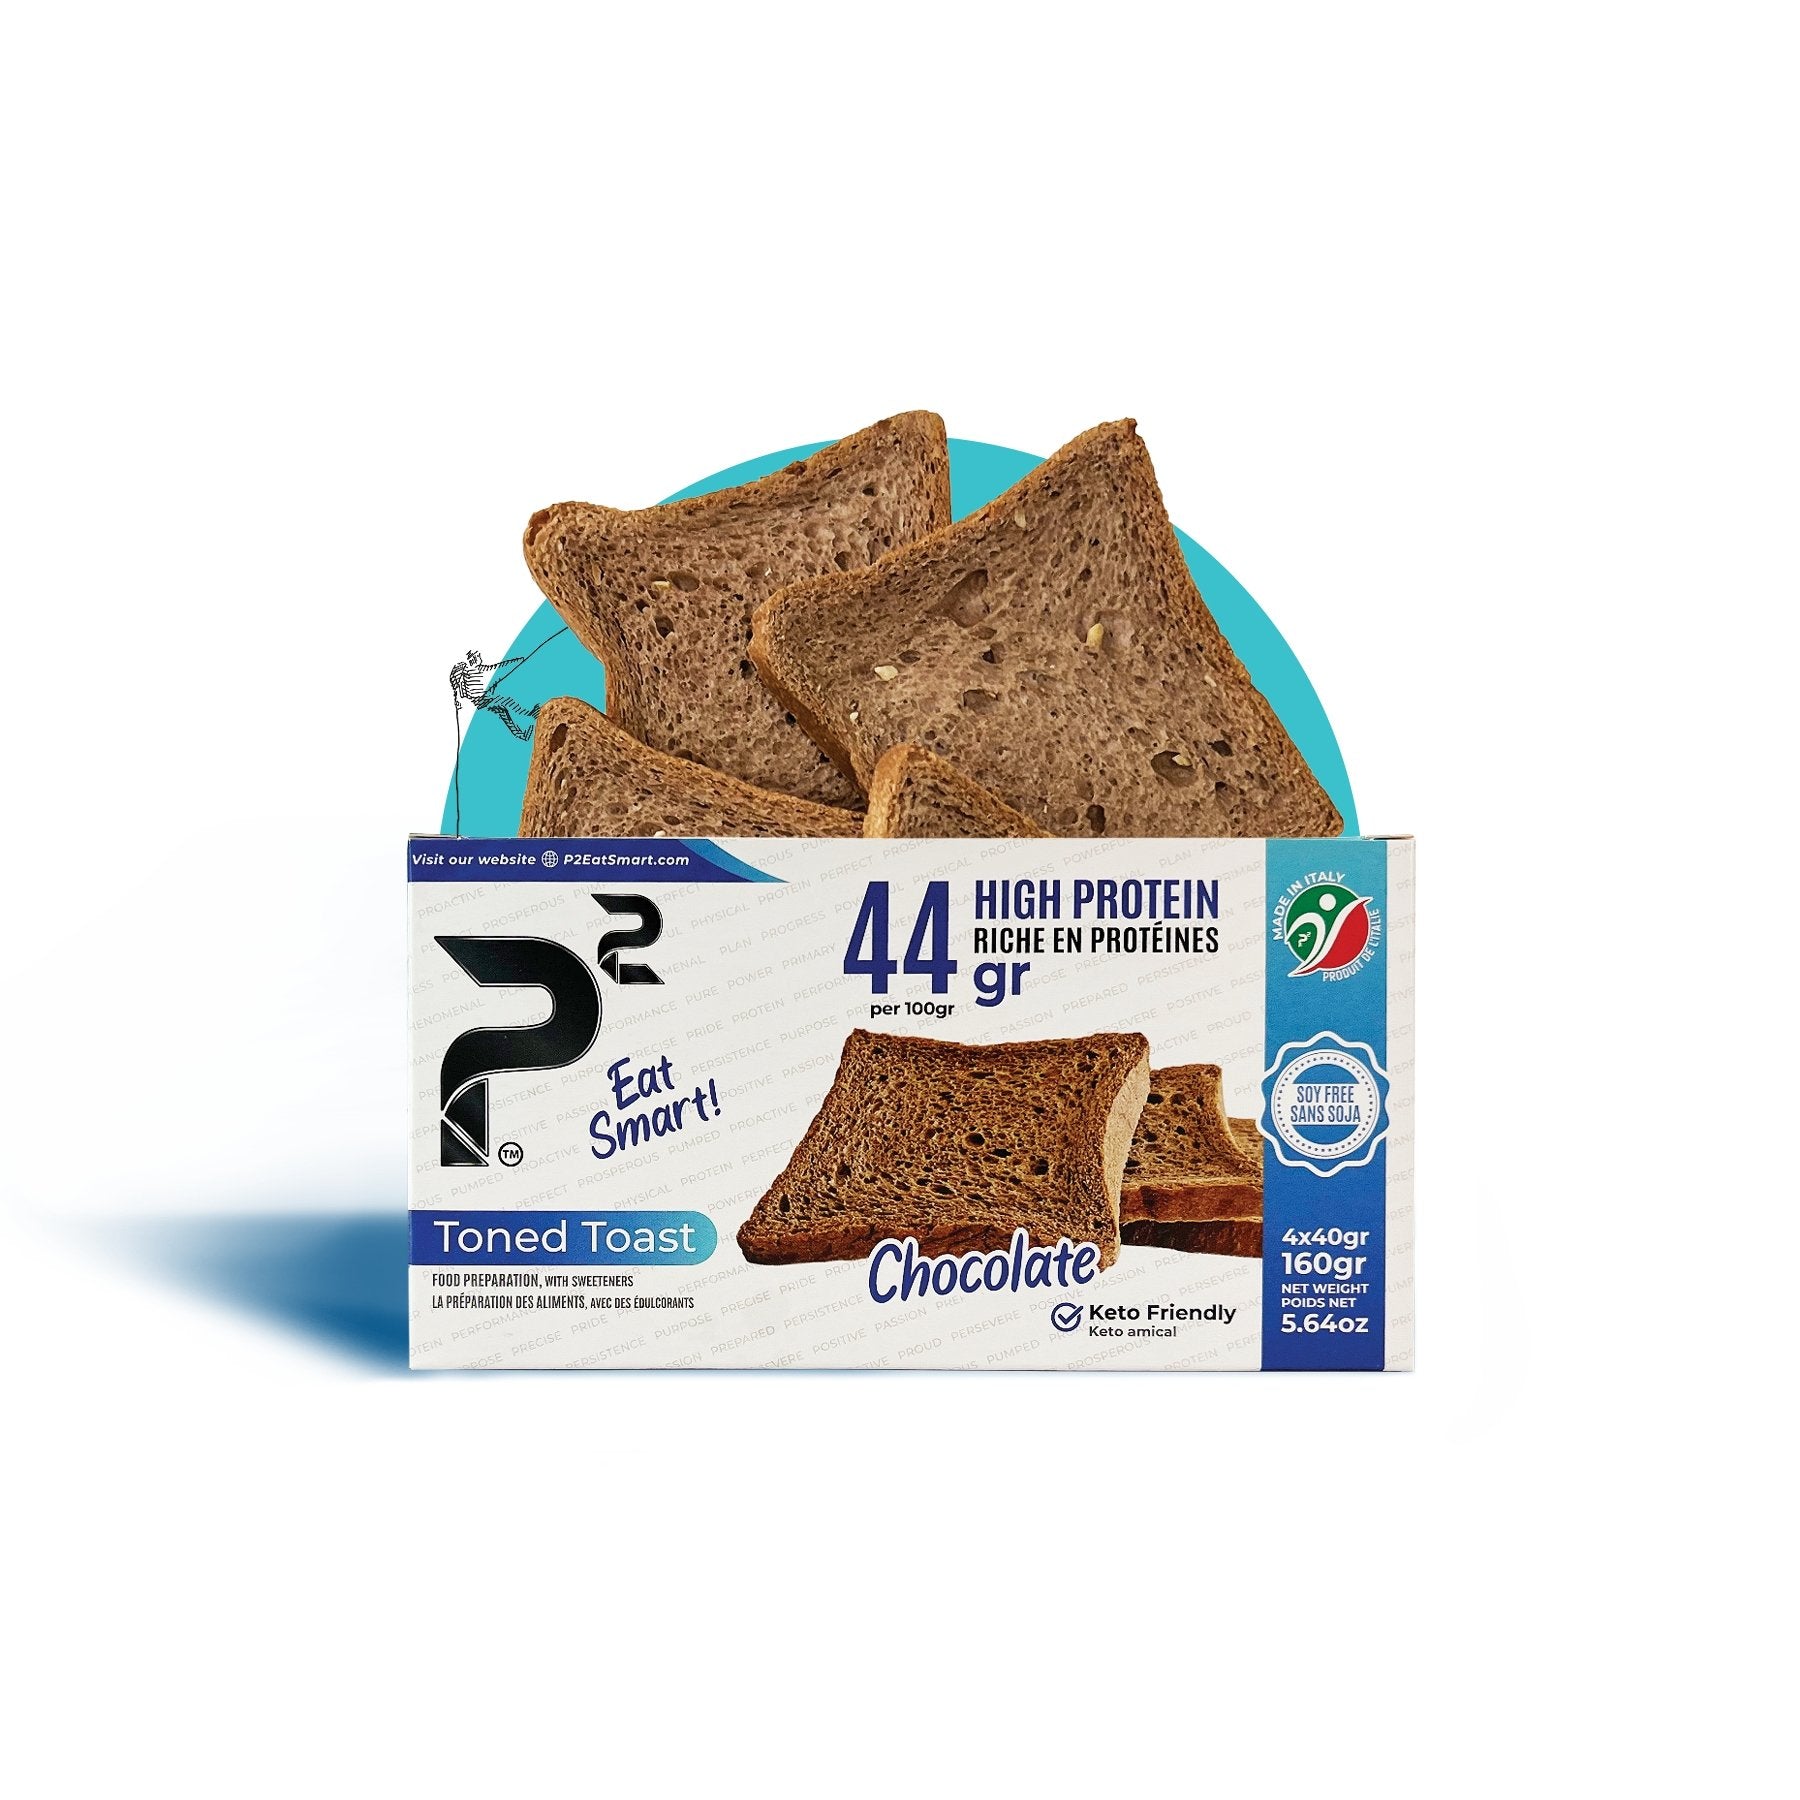 Toned Toast Chocolate. High protein. Low carbs. 44g protein and 8g net carbs per 100g. No added sugar, Soy free, No flour, Lactose free, Diabetic friendly, Low glycemic index.